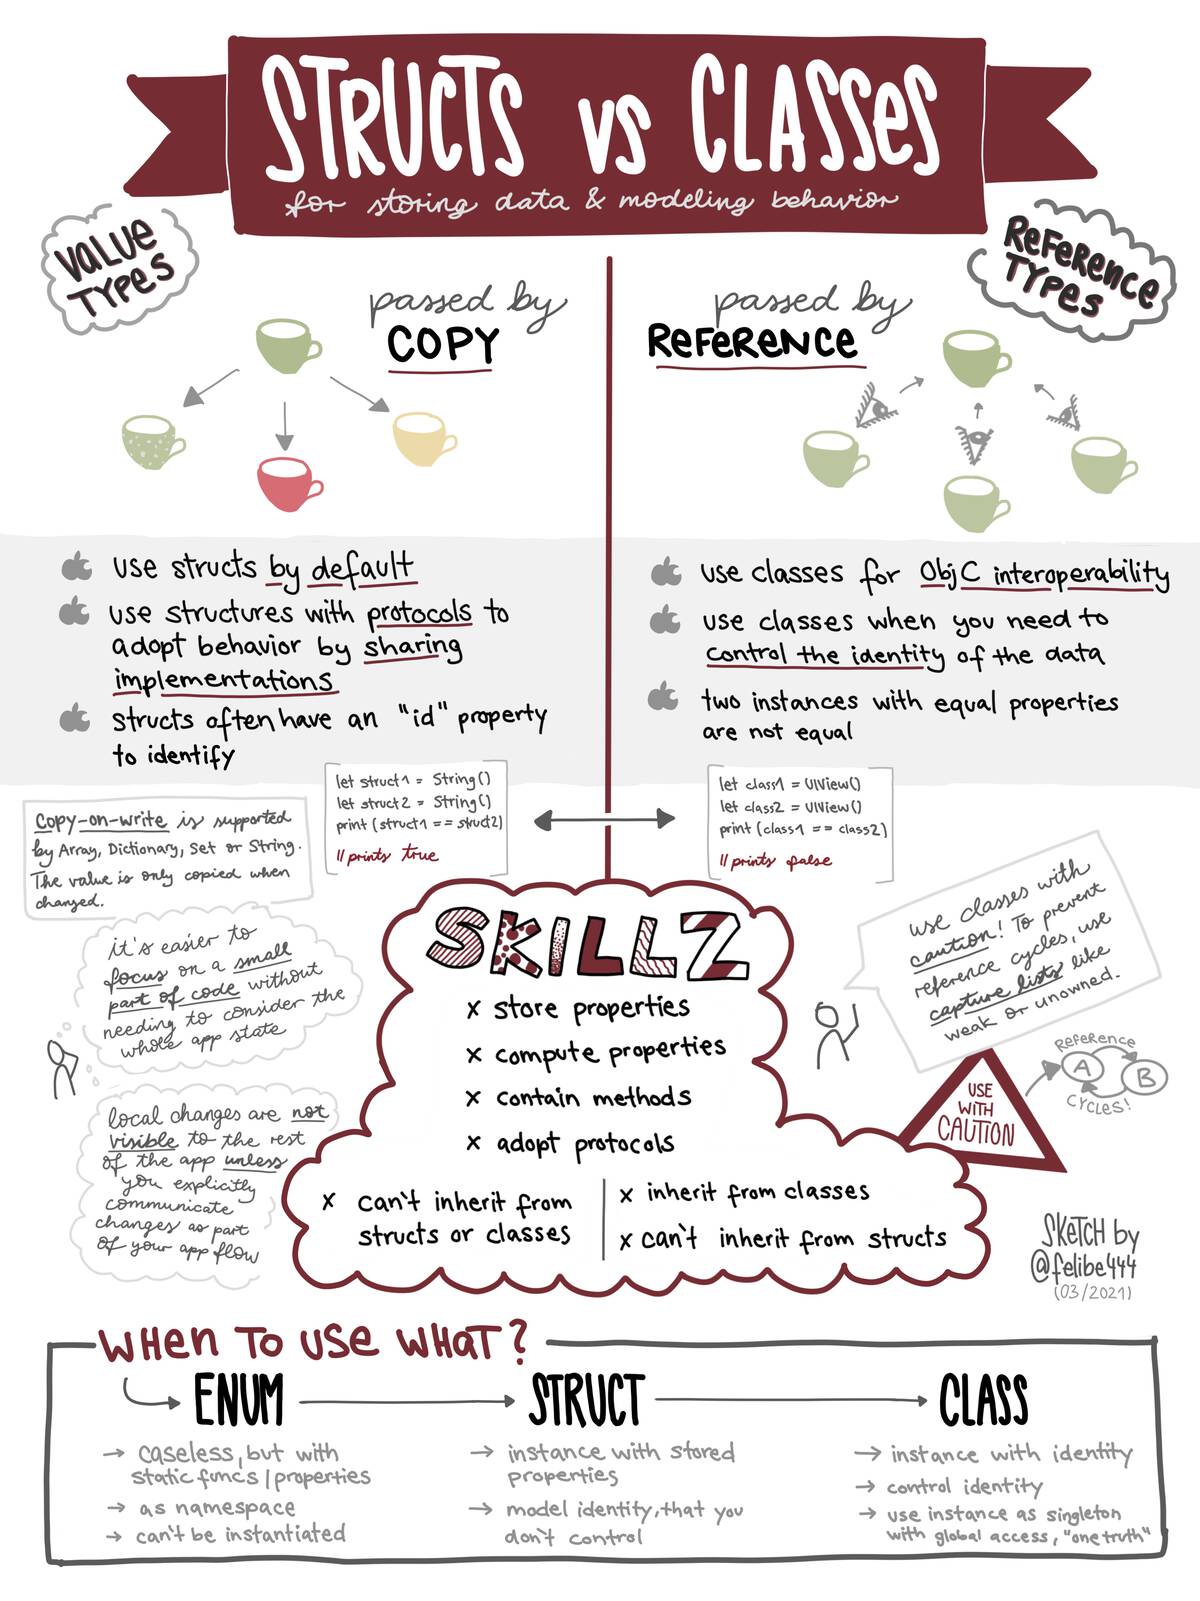 Sketchnote about the differences between structs and classes in Swift.